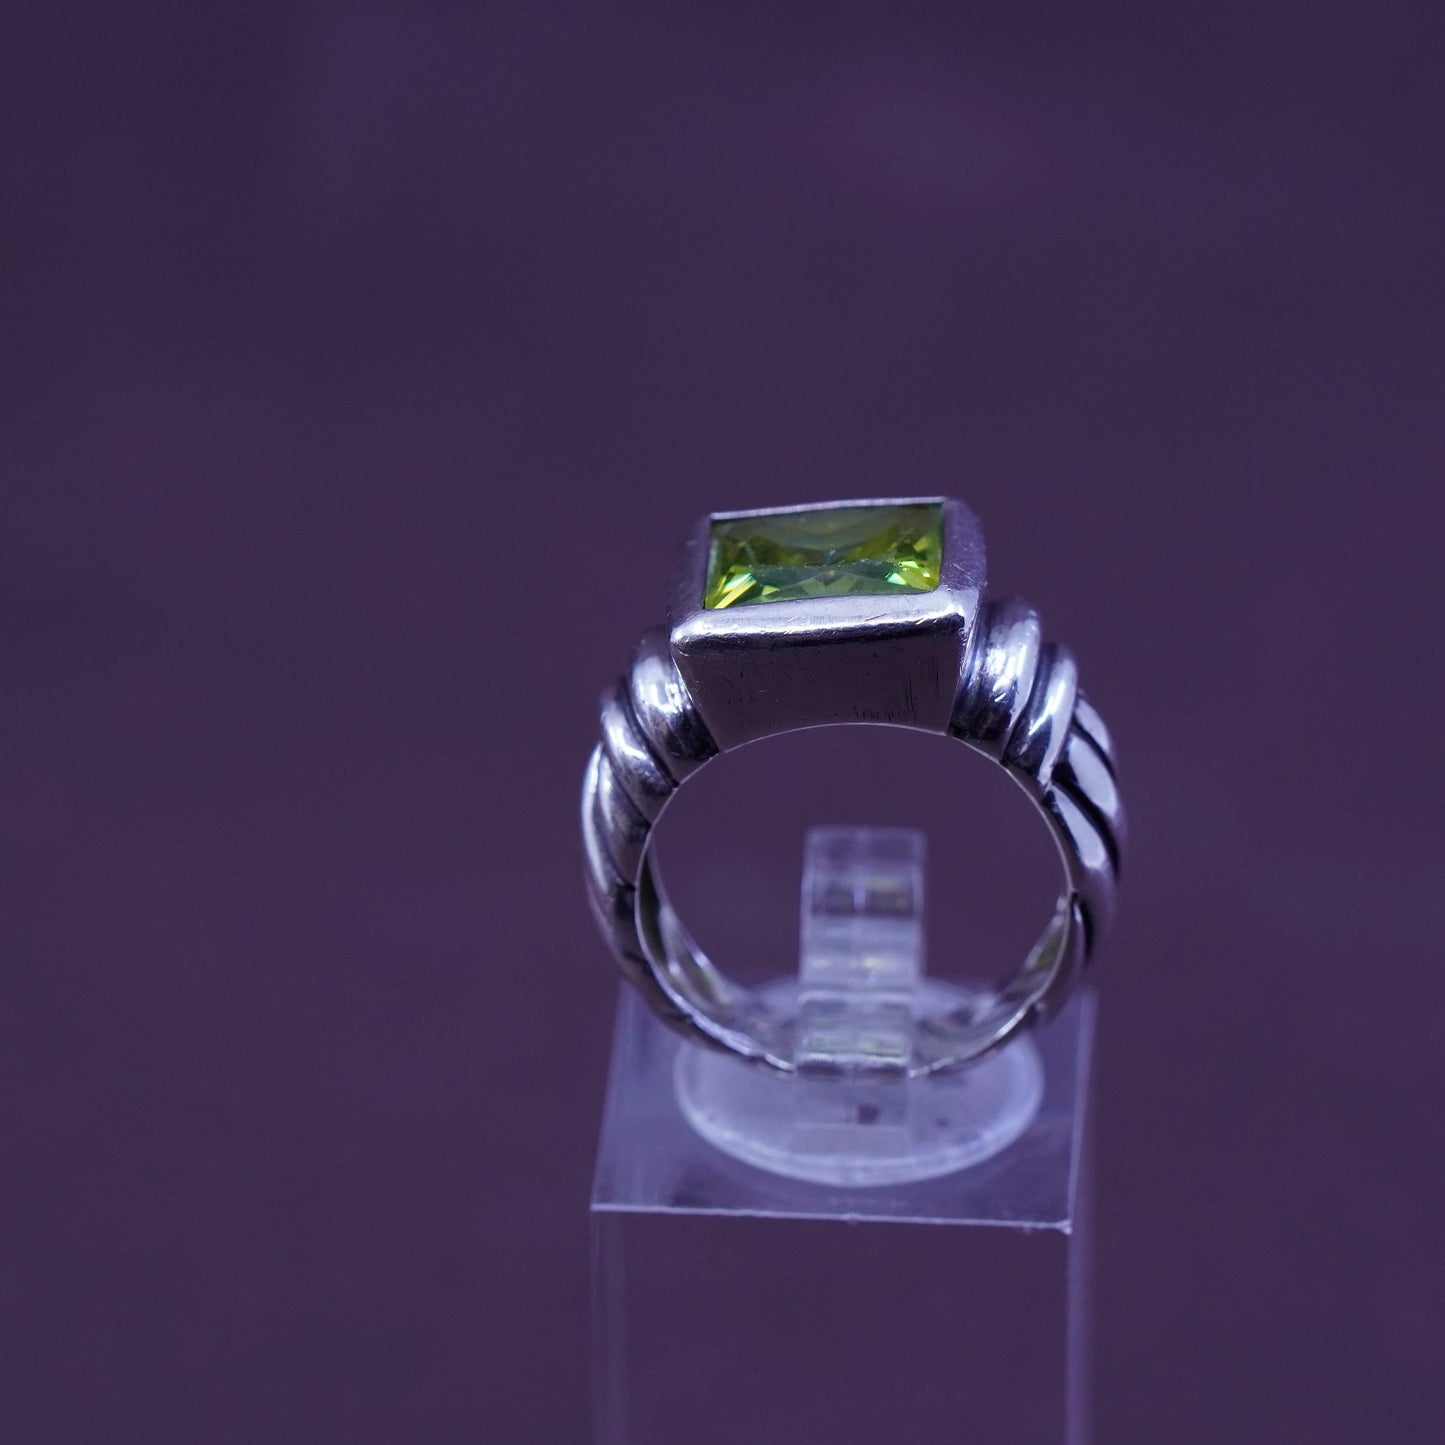 Size 7, vintage Sterling 925 silver handmade ring with square peridot